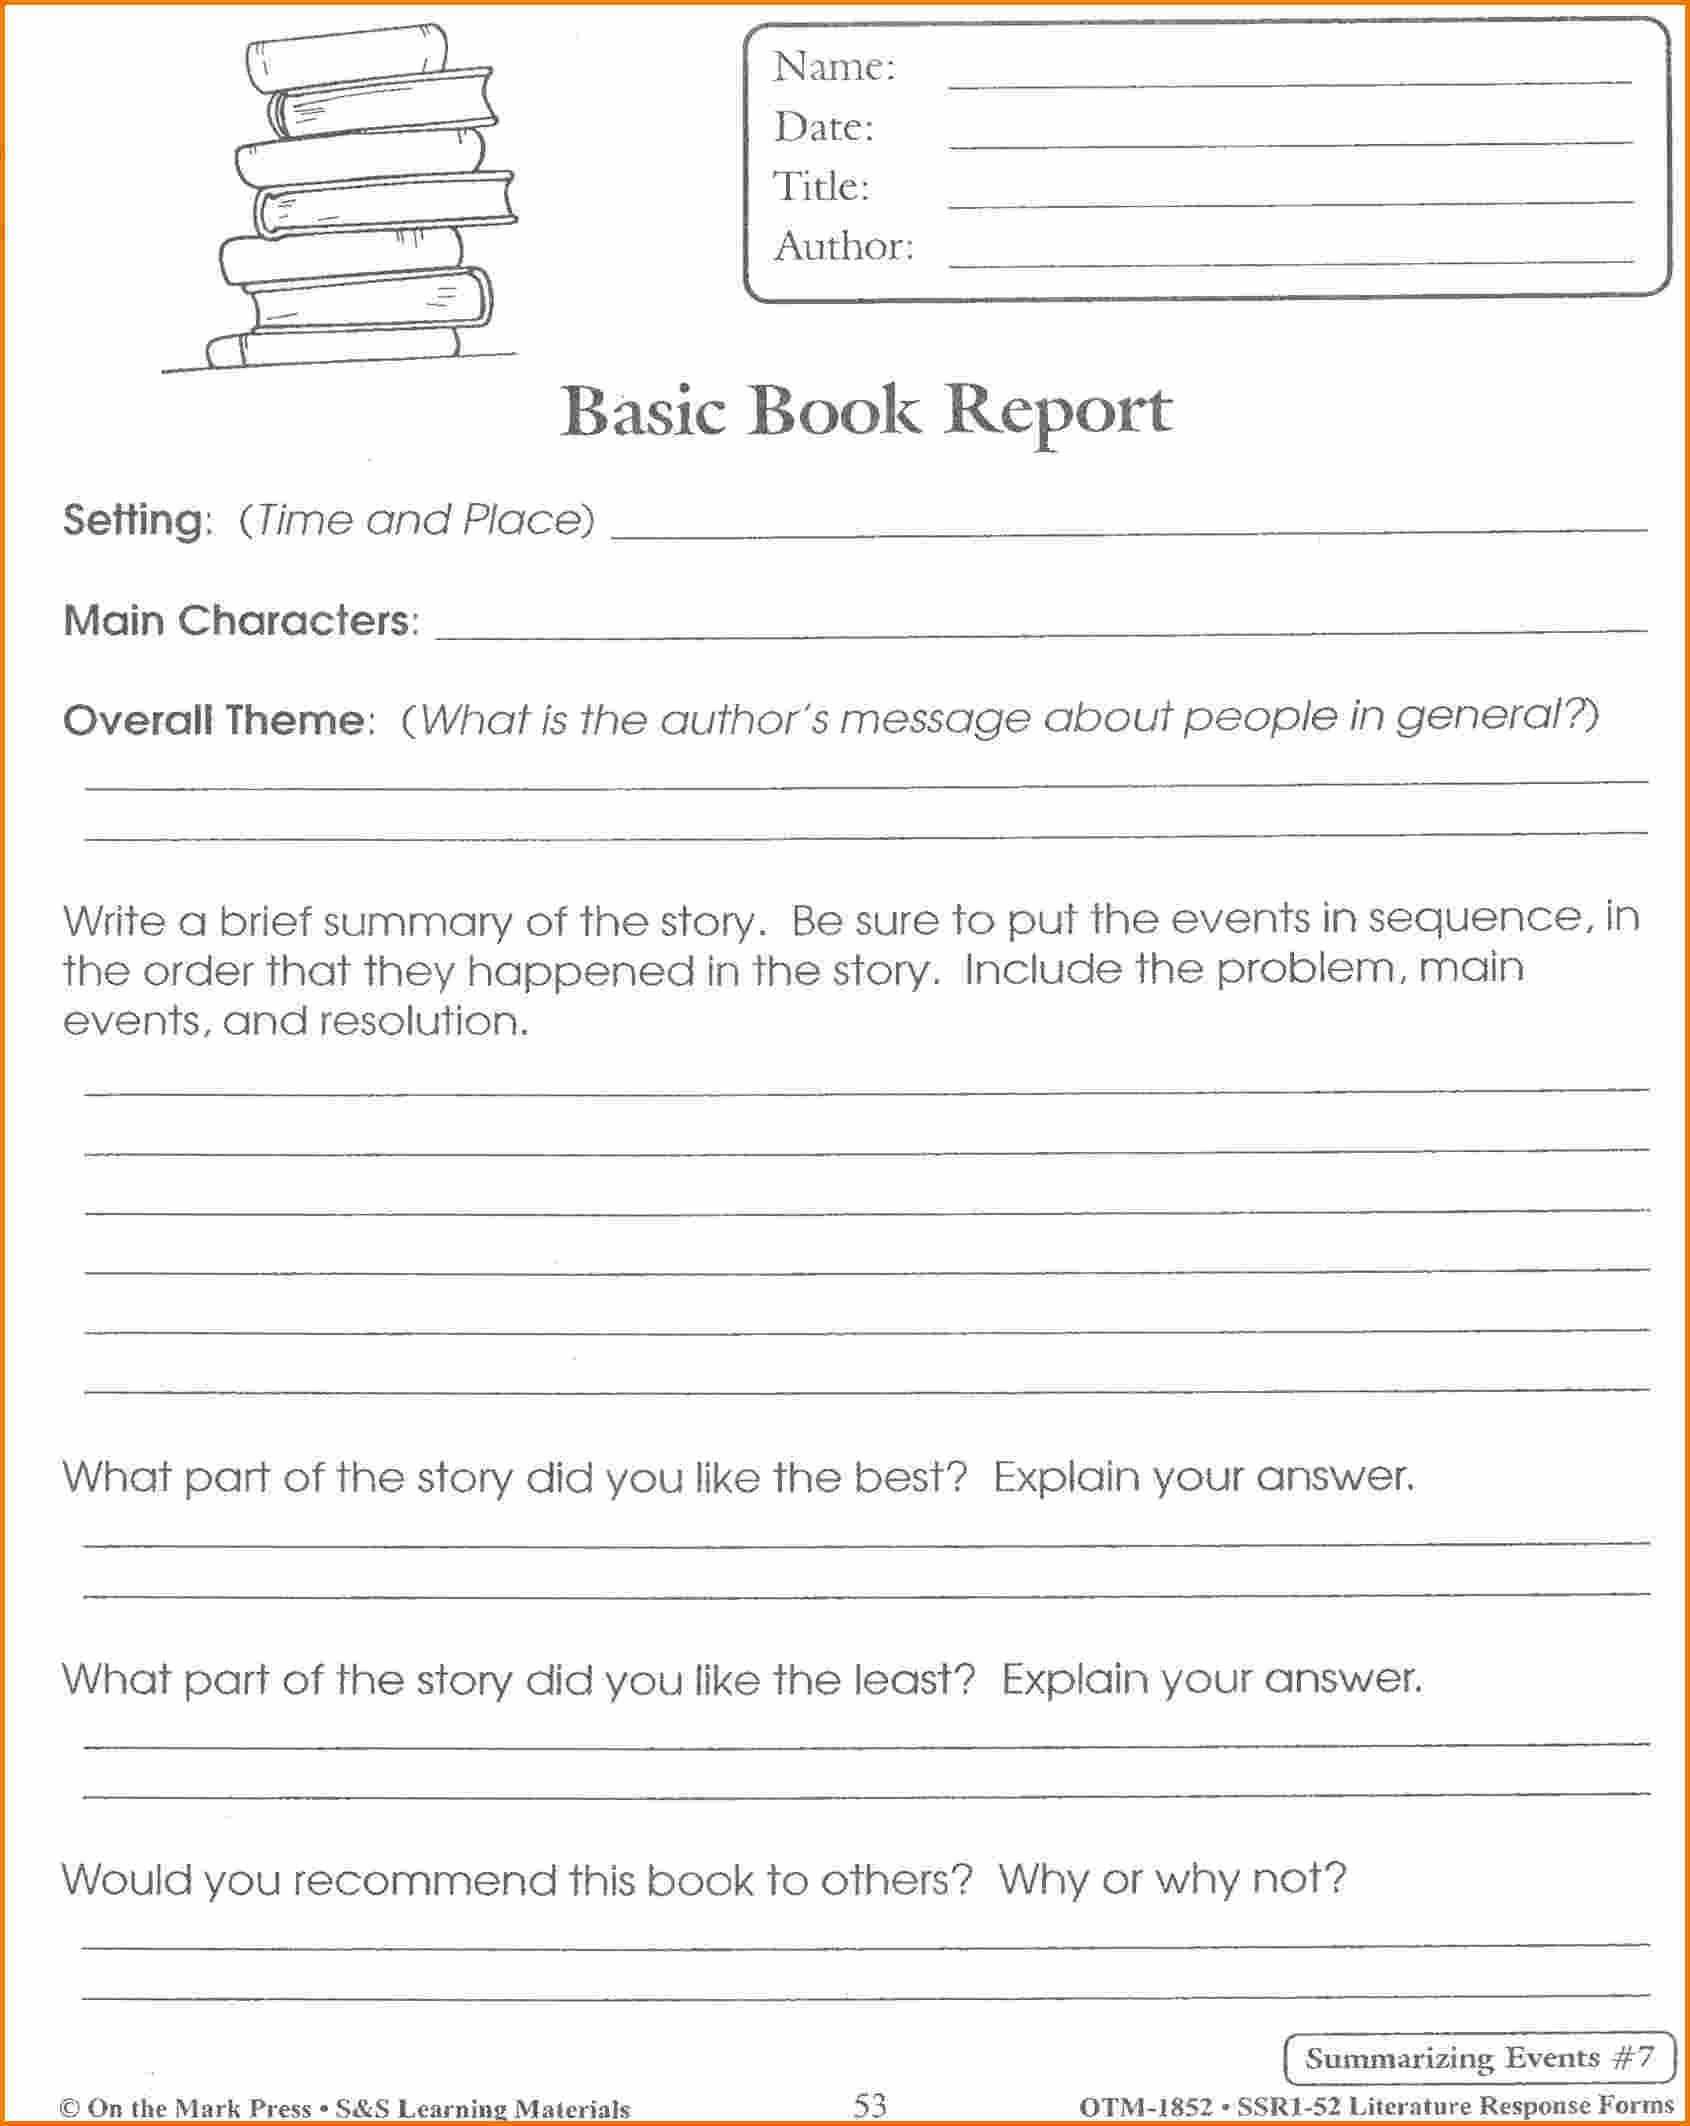 Pinmarcus Tong On Book | Book Report Templates, Book With Regard To 1St Grade Book Report Template